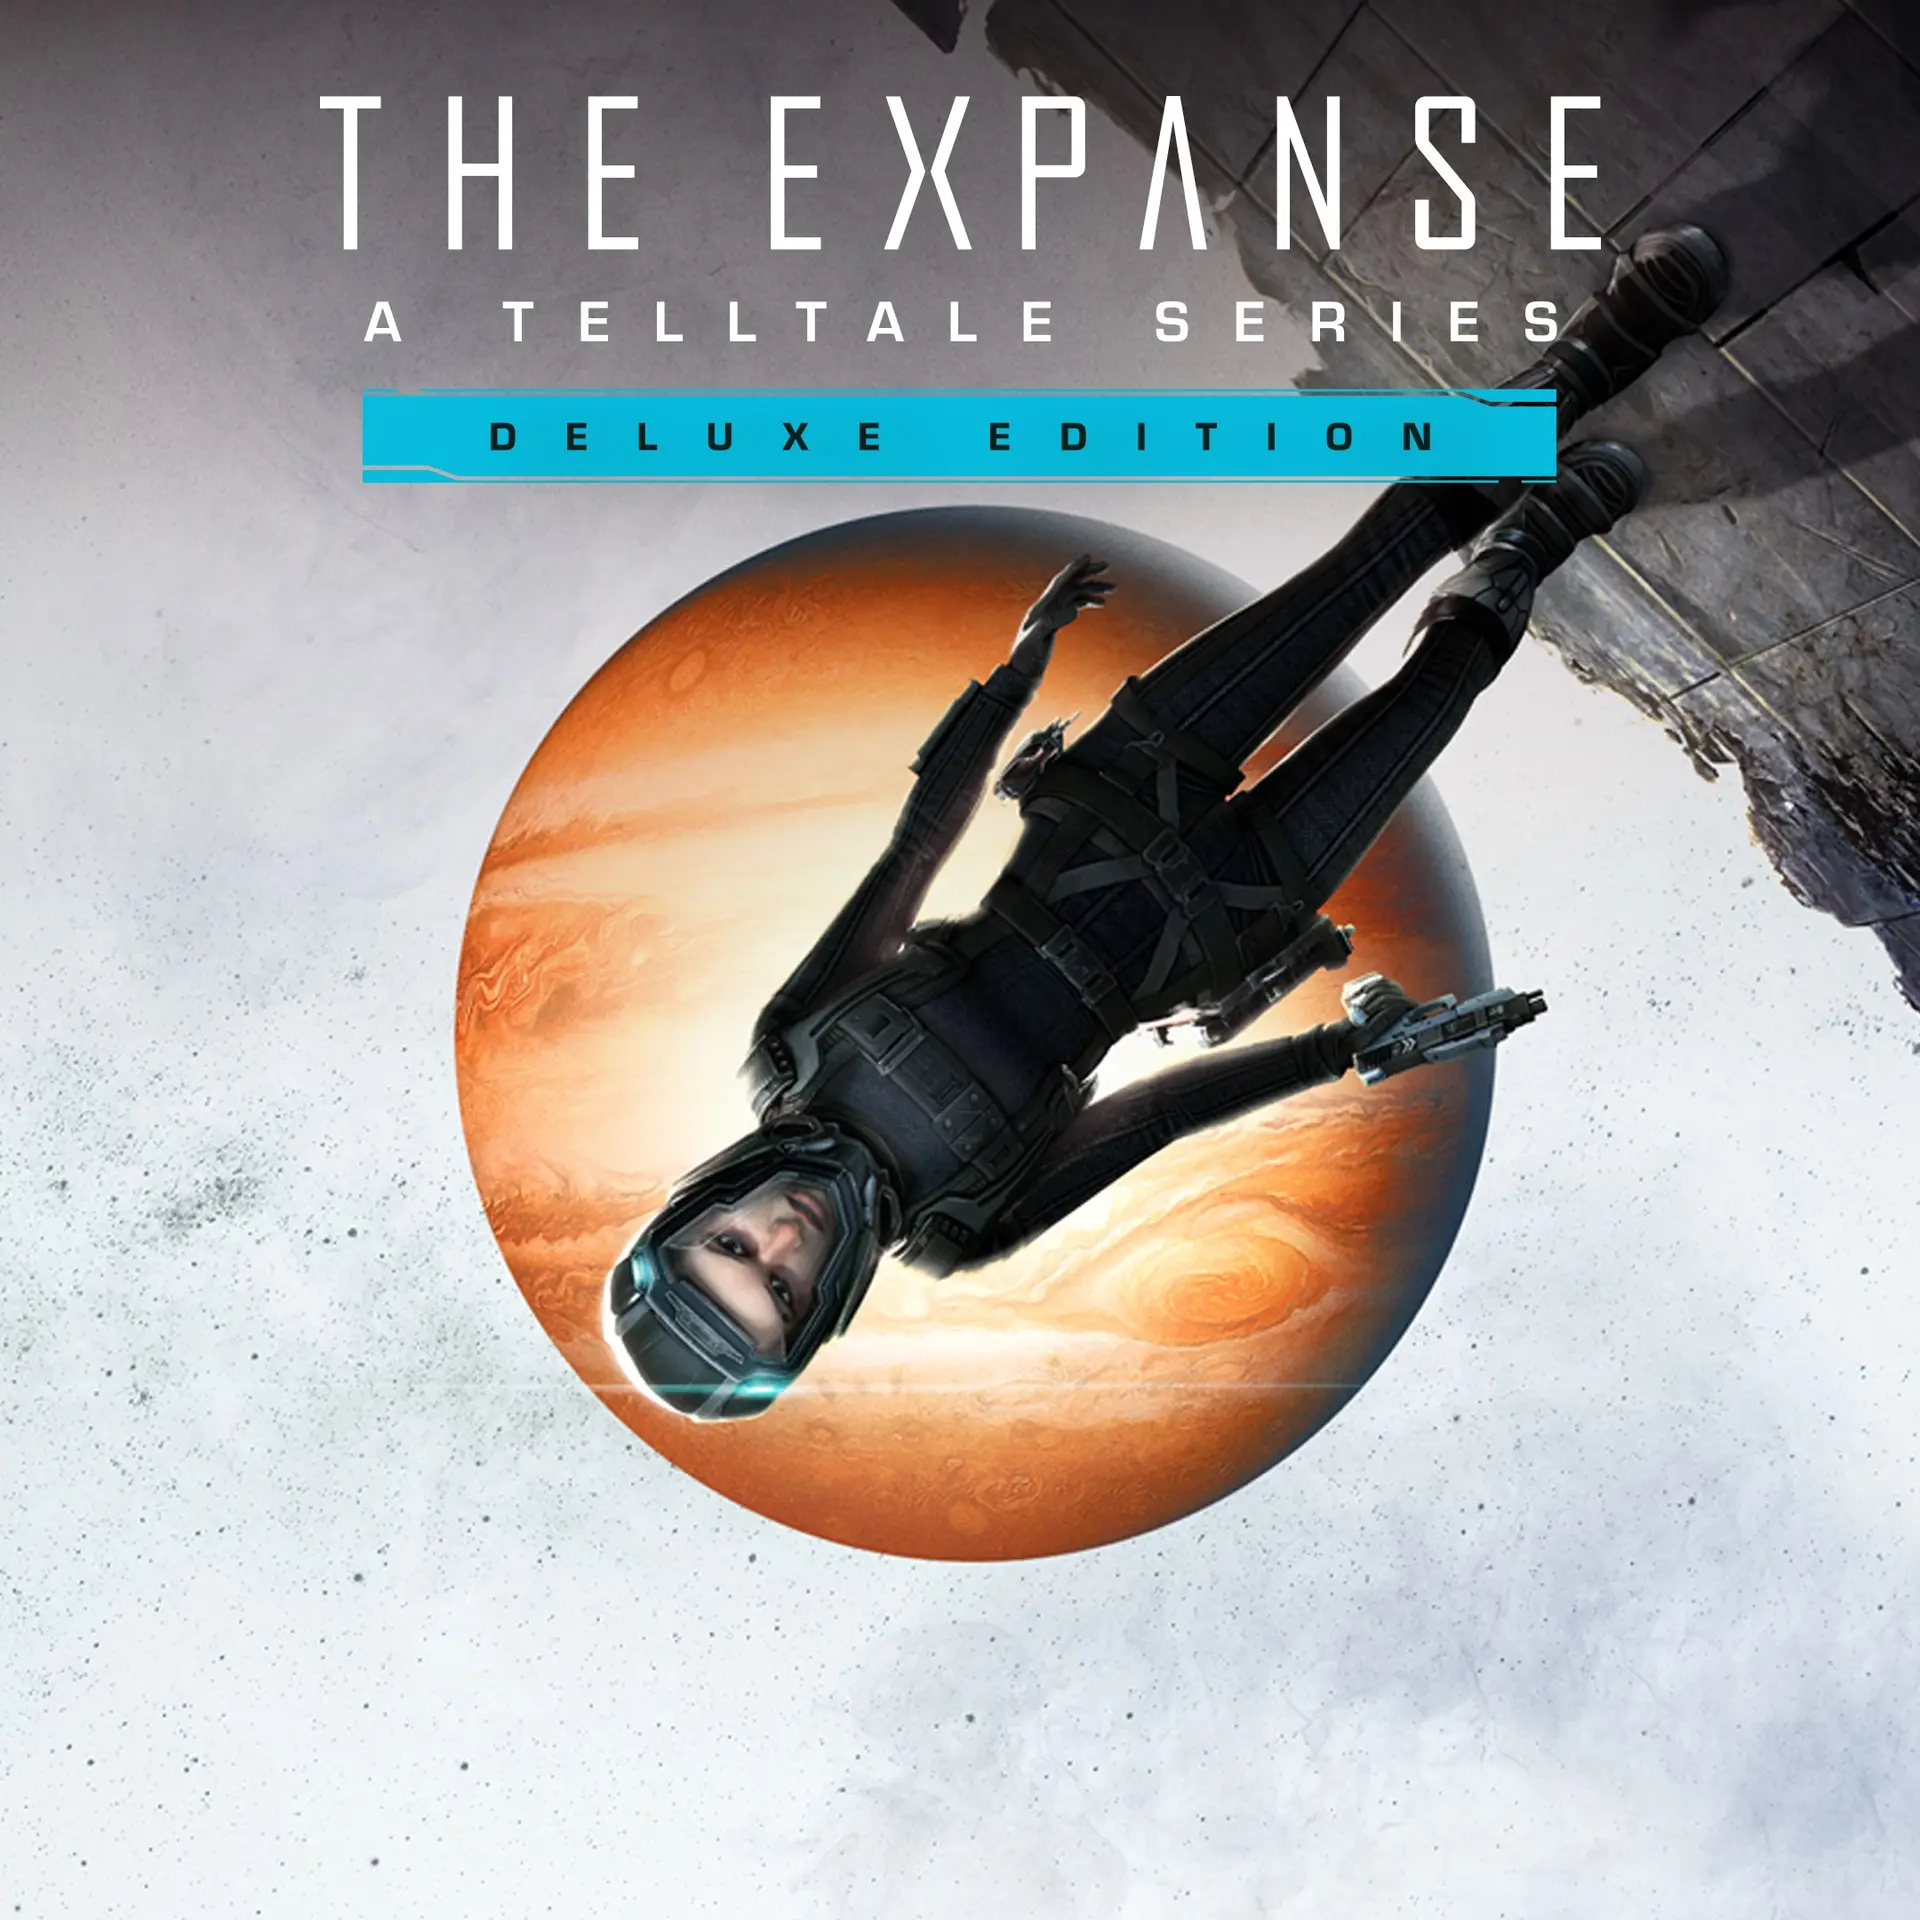 The Expanse: A Telltale Series - Deluxe Edition (XBOX One - Cheapest Store)